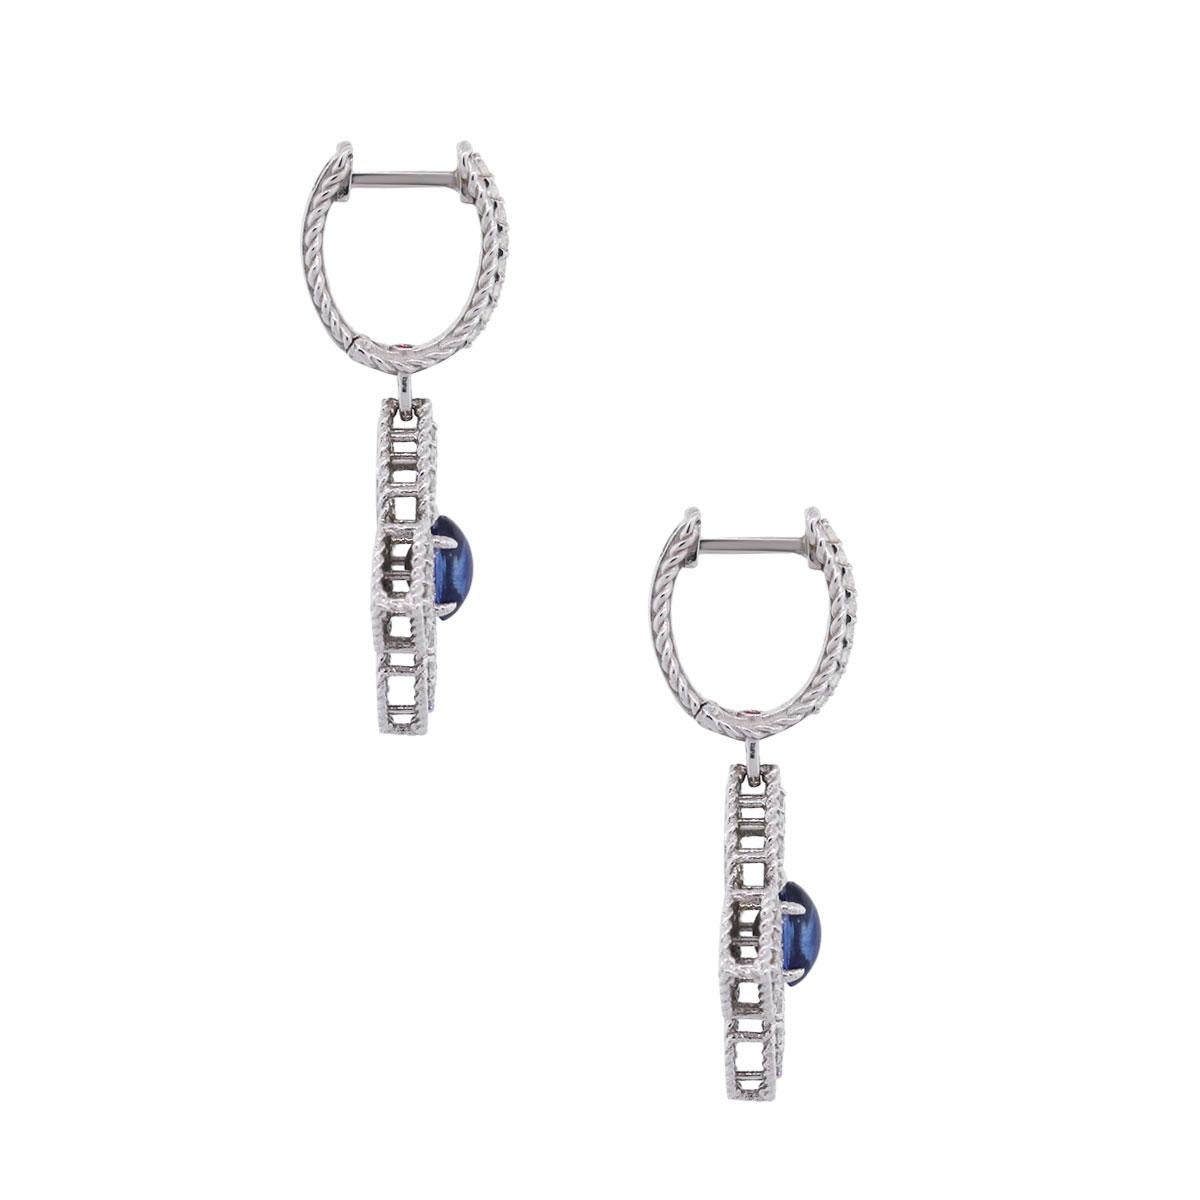 Designer: Roberto Coin
Material: 18k white gold
Diamond Details: 1.04ctw of round brilliant diamonds. Diamonds are G in color, VS in clarity
Gemstone Details: Oval shape cabochon sapphires measuring approximately 5.77mm x 3.40mm each
Earring